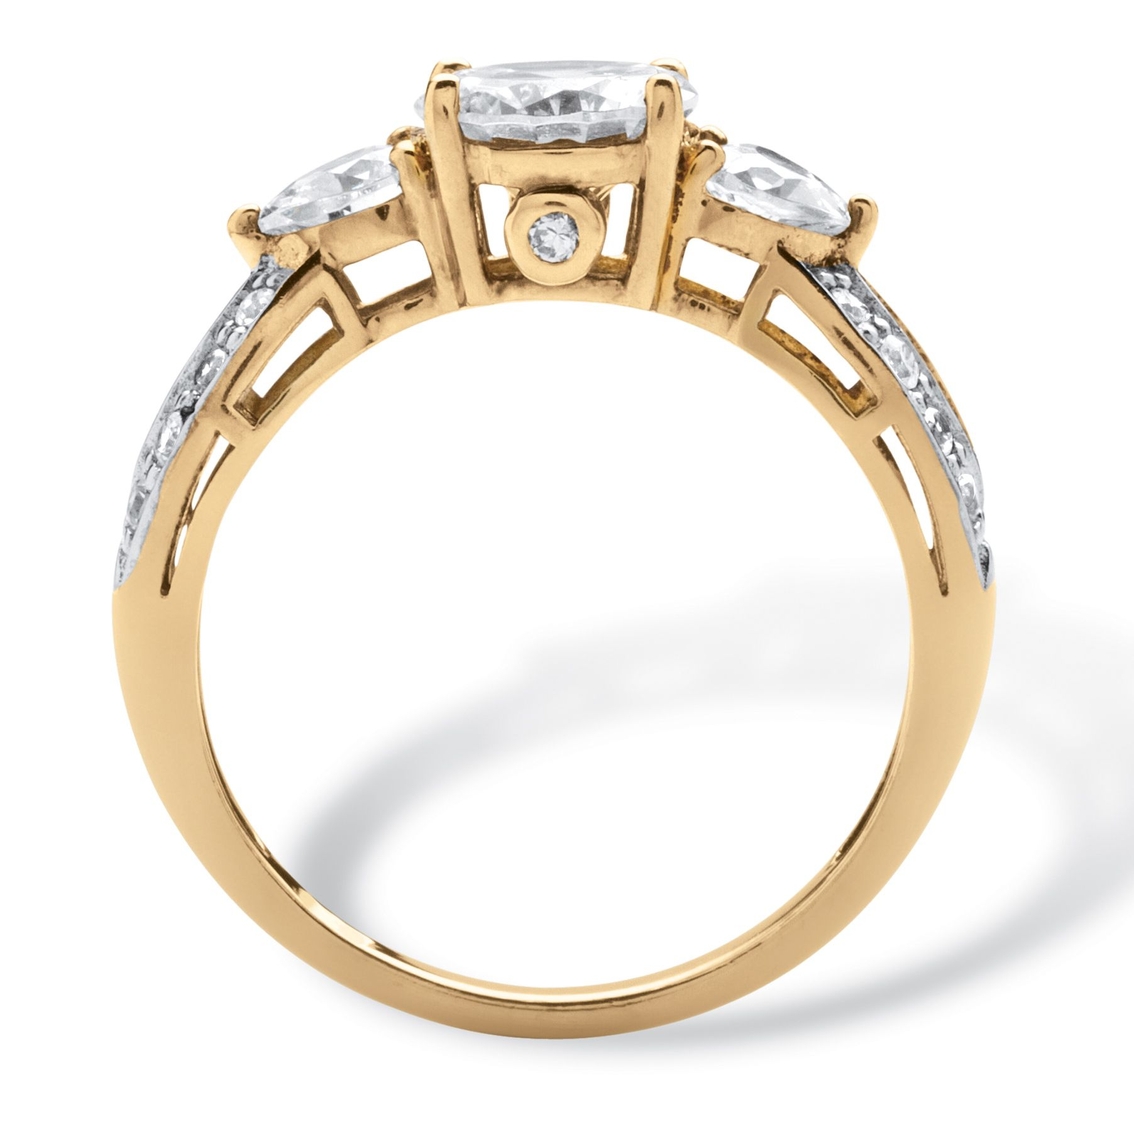 2.23 TCW Round and Heart-Cut Twisting Shank Cubic Zirconia Ring in Solid 10k Gold - Image 2 of 5